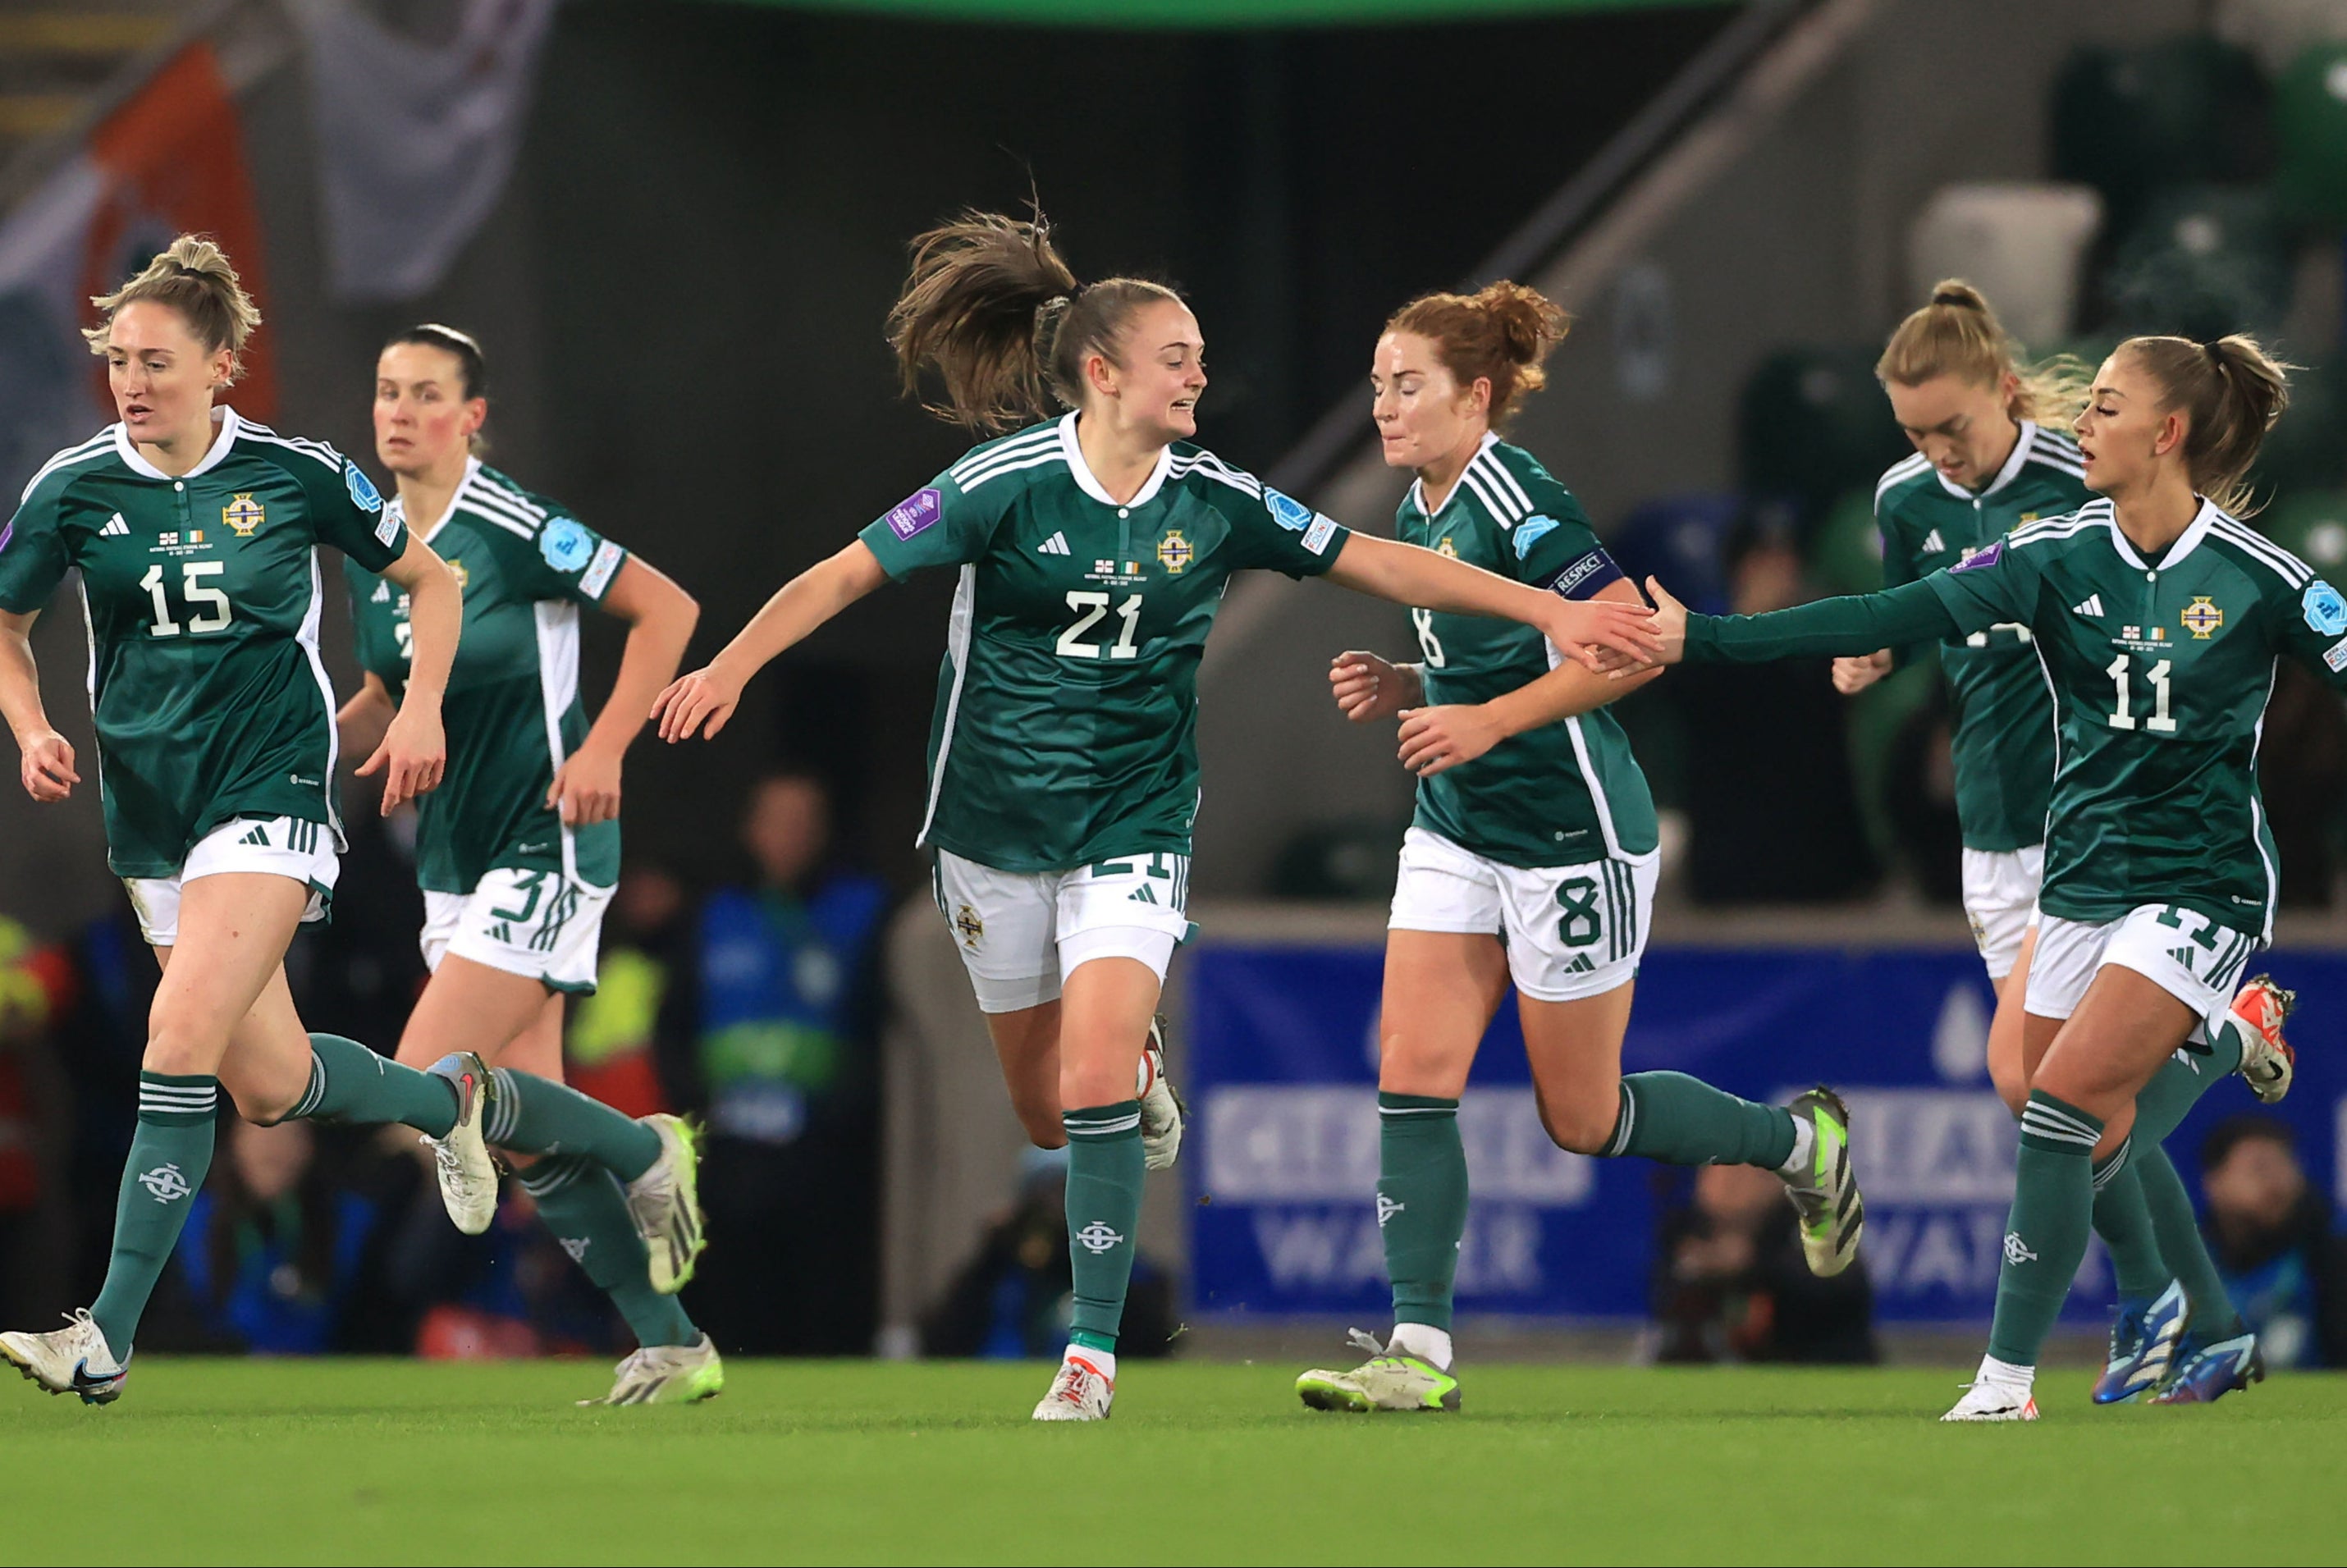 Northern Ireland are headed to the Nations League play-offs